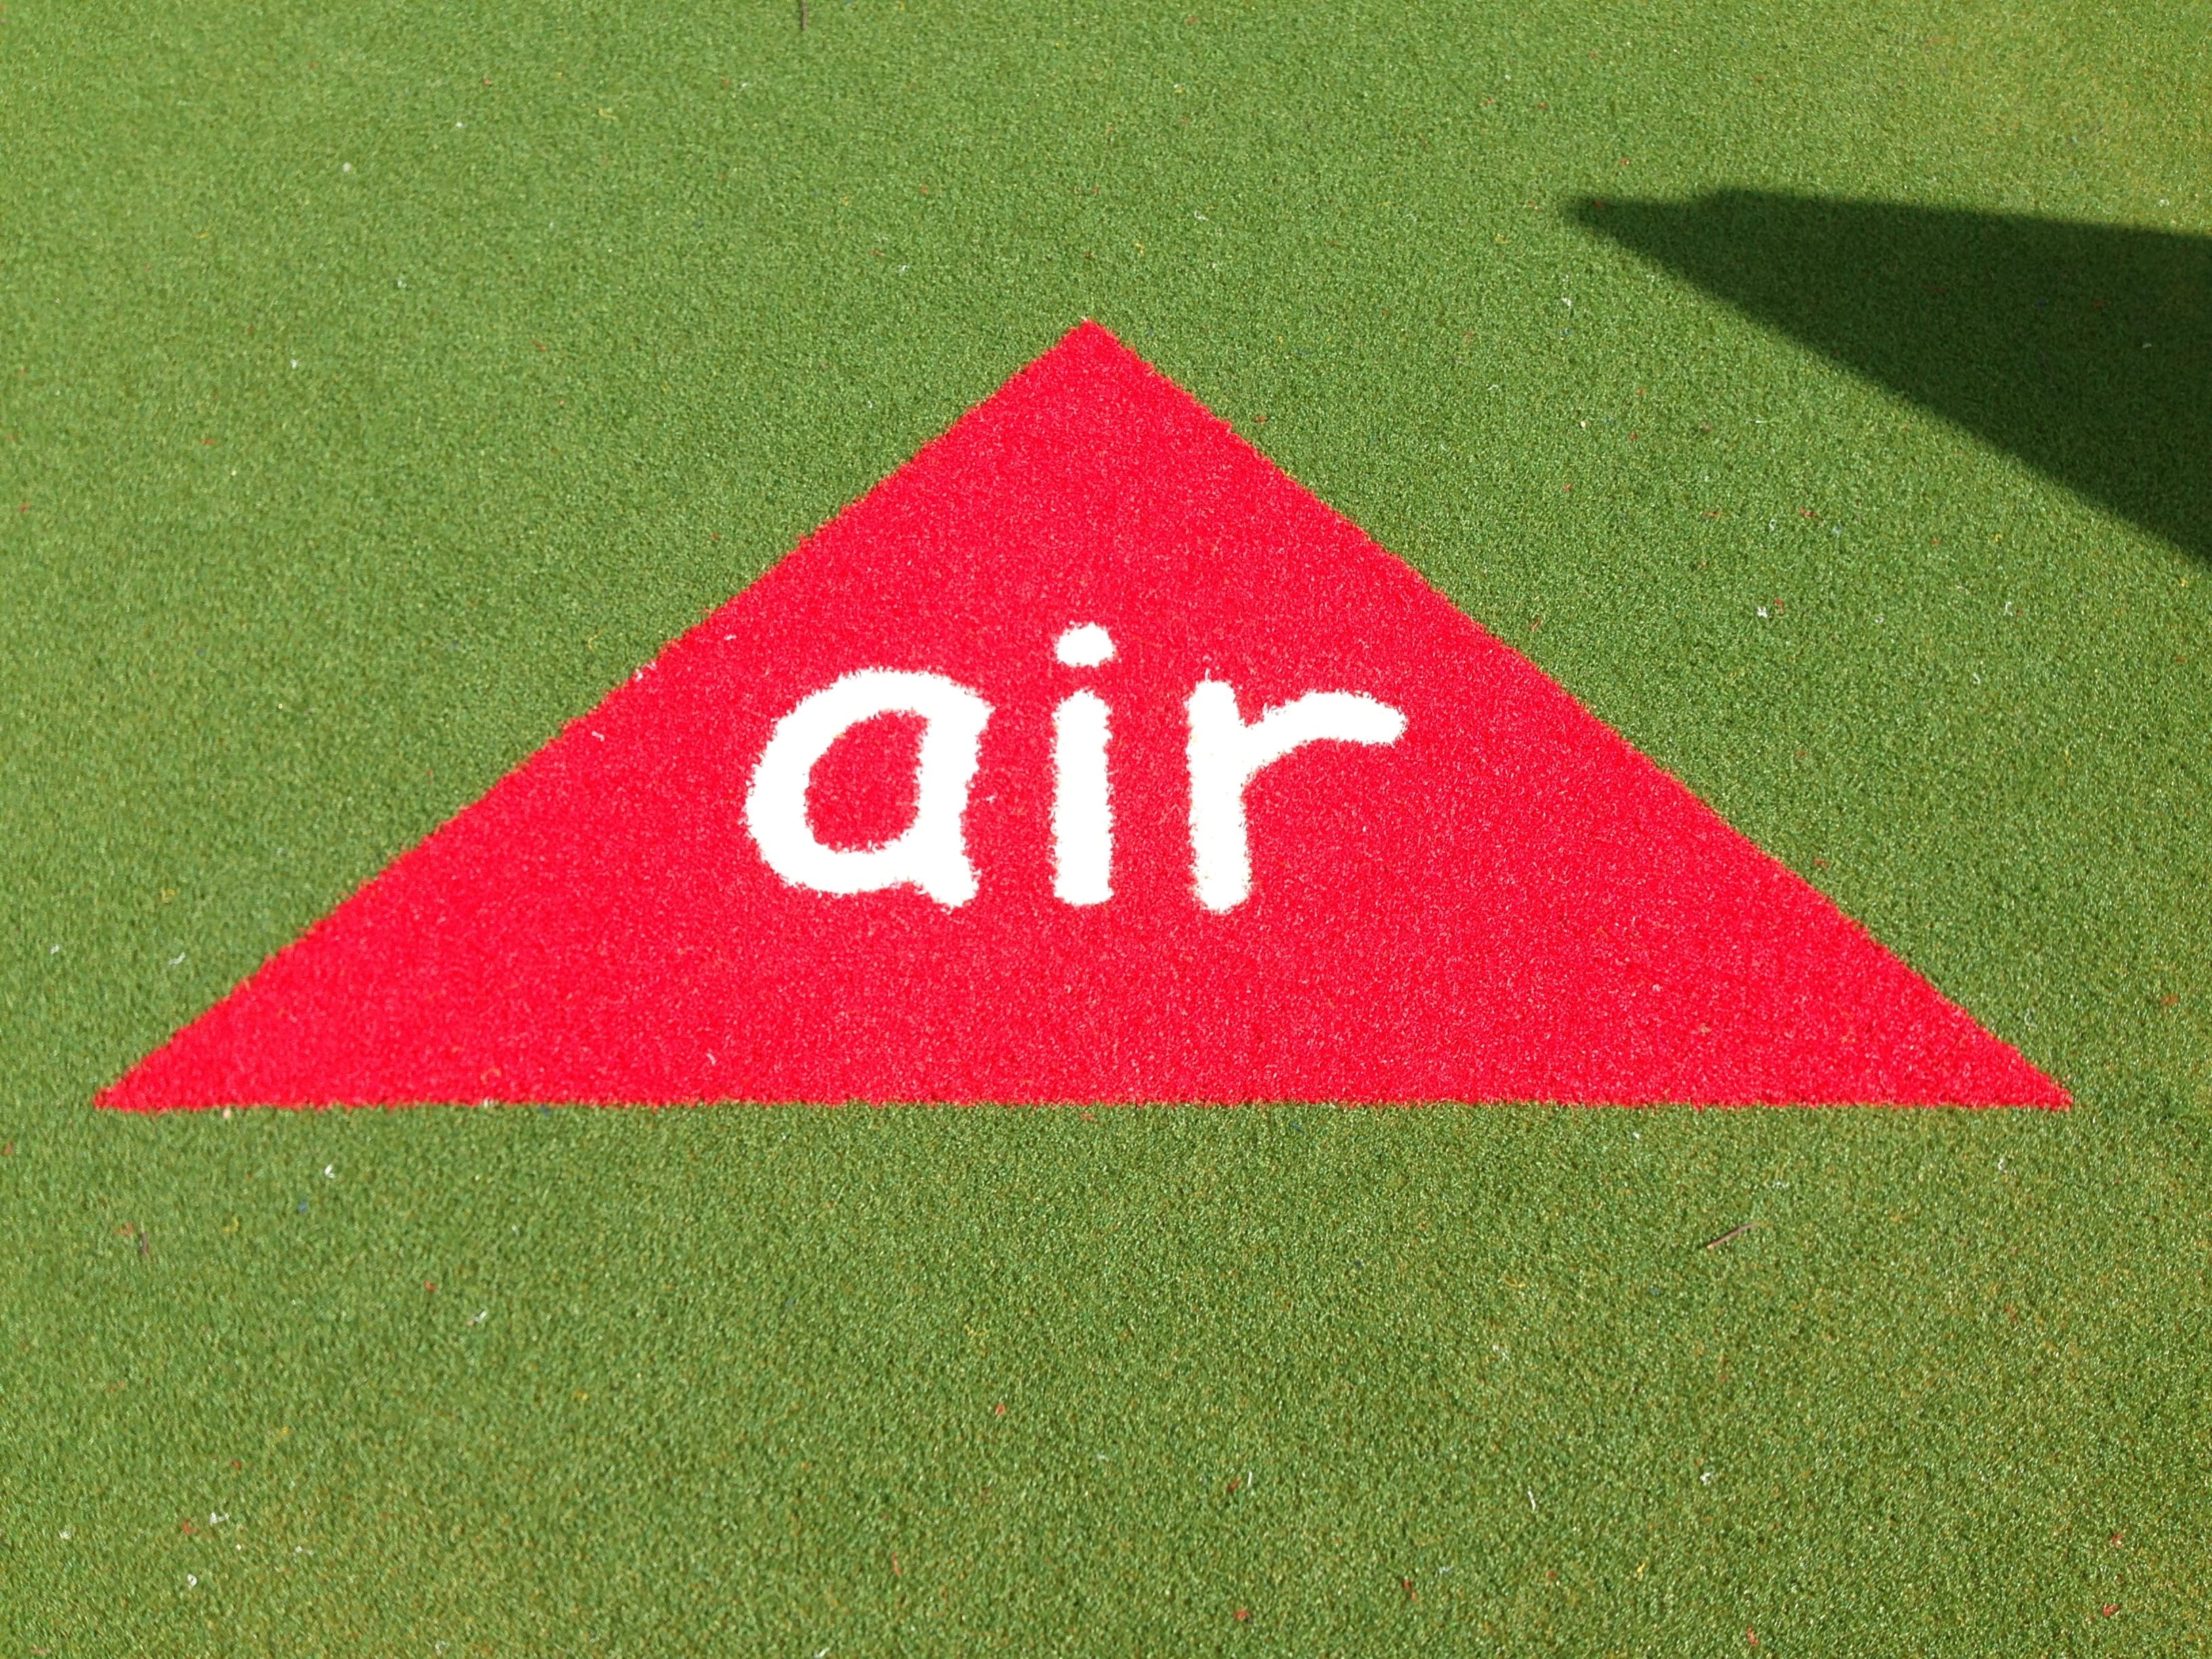 red triangle phonics tile spelling 'air'